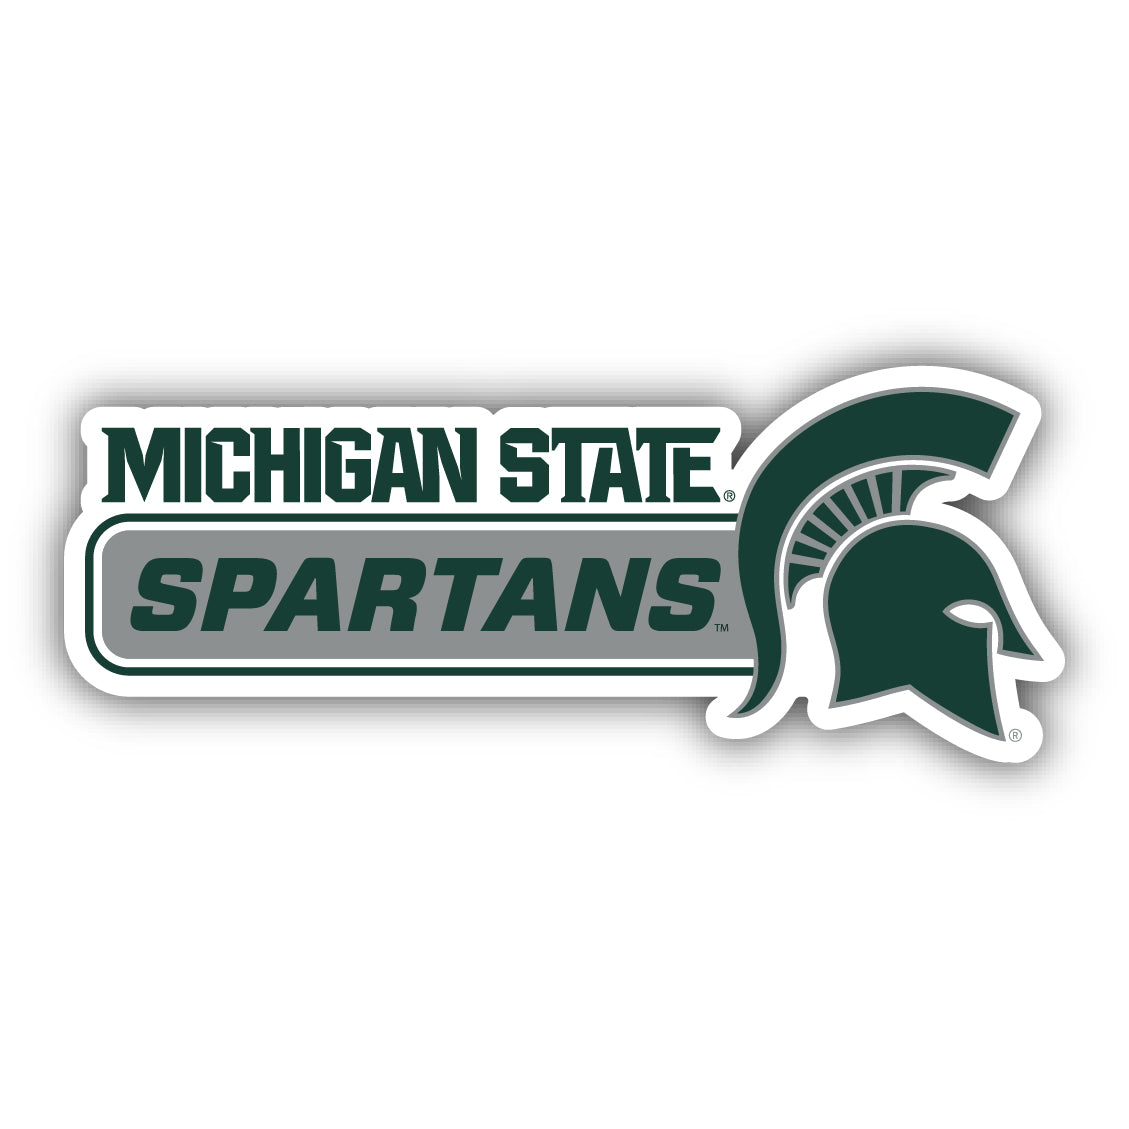 Michigan State Spartans 4 Inch Wide Colorful Vinyl Decal Sticker